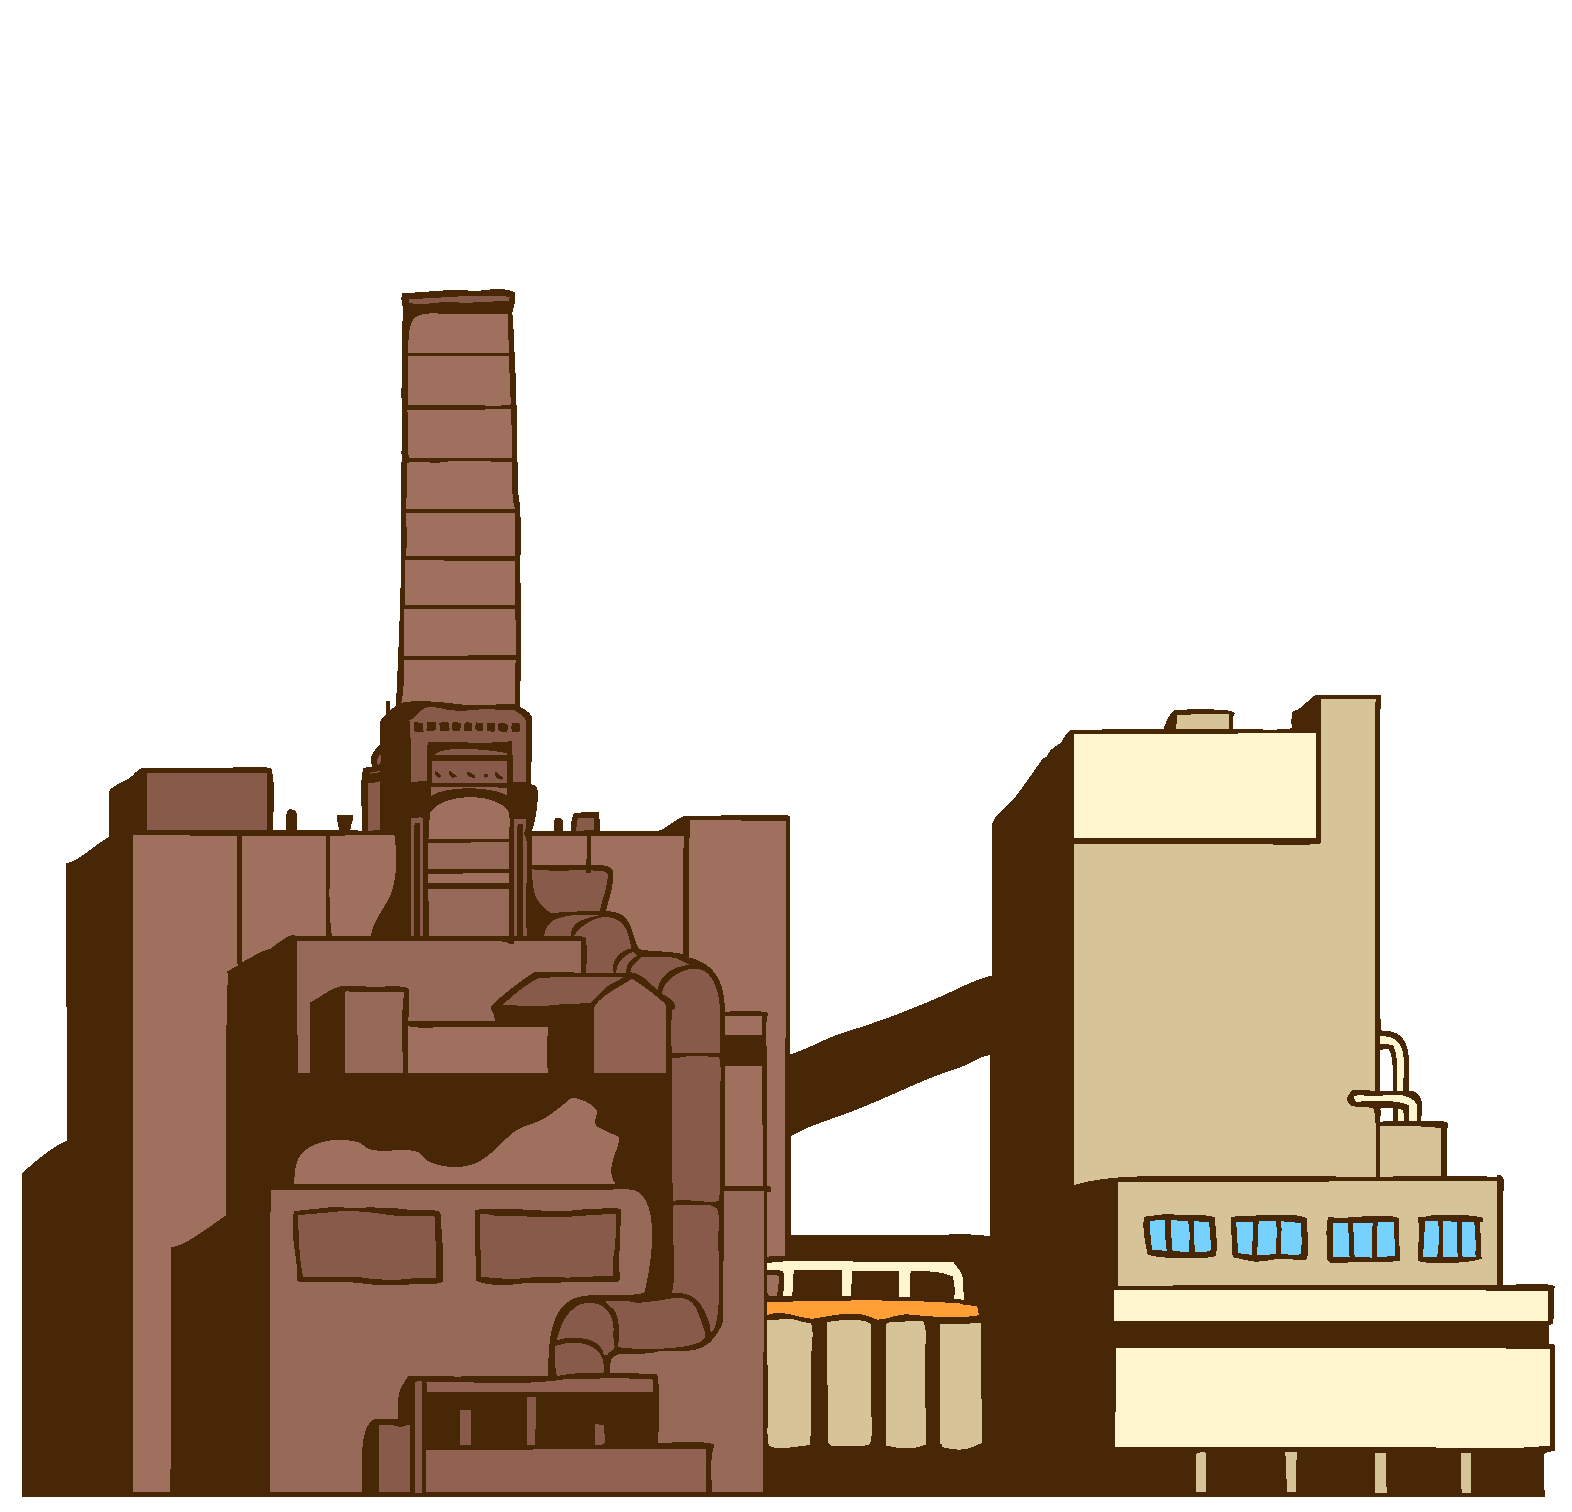 This is a cartoon version of a factory.